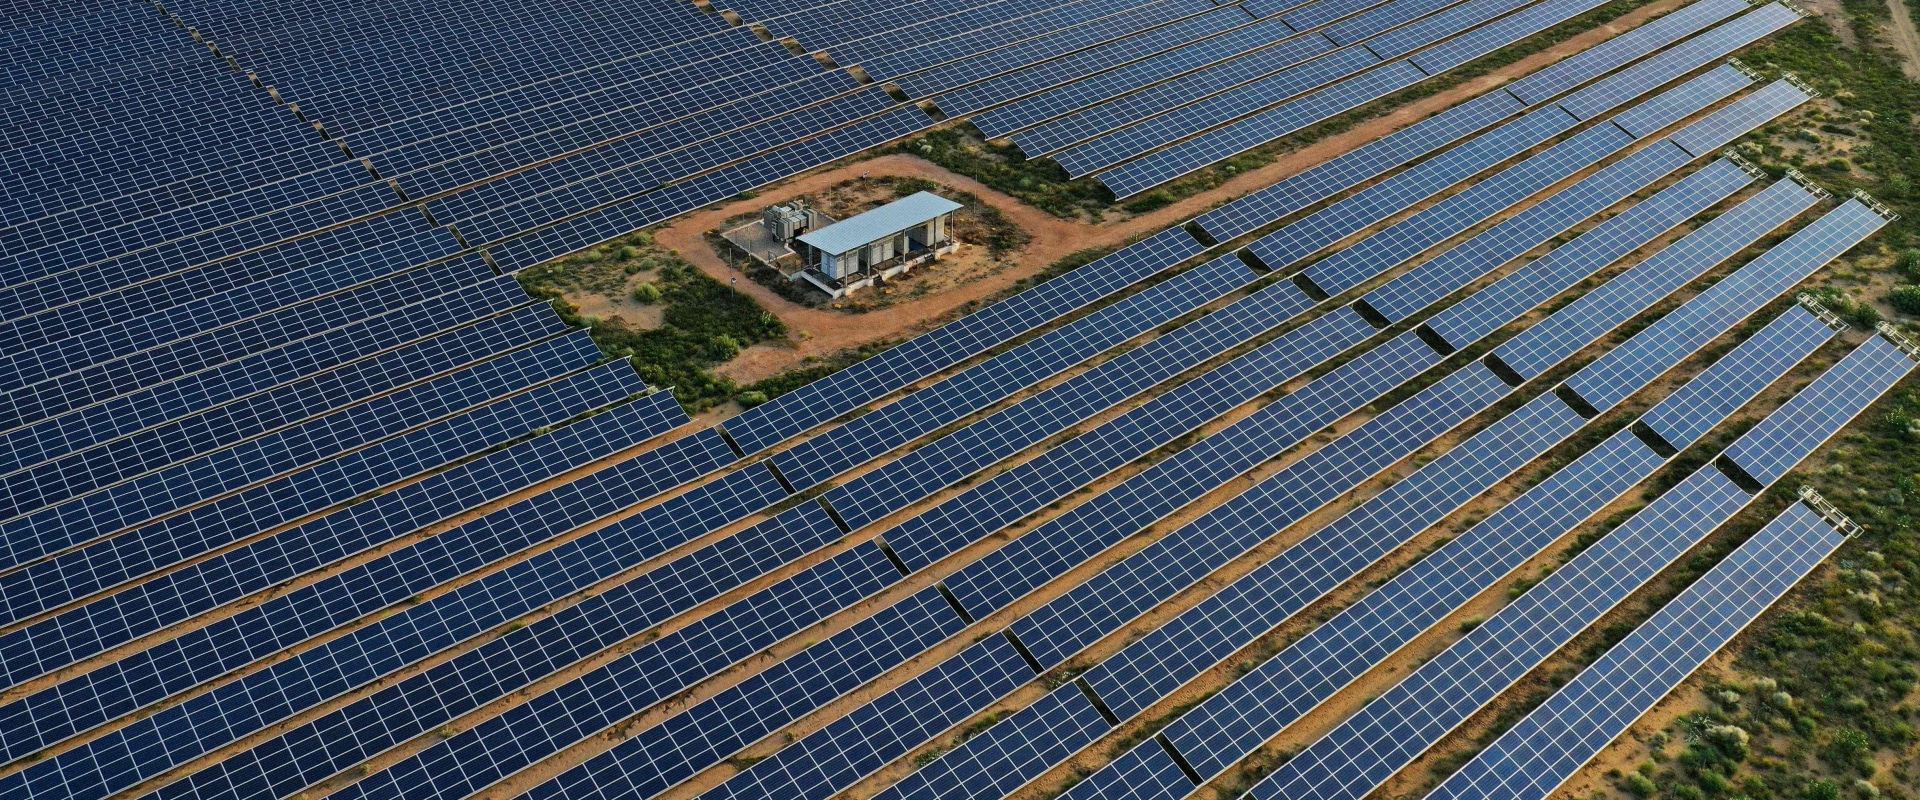 Where is the Largest Solar Power Plant in India?